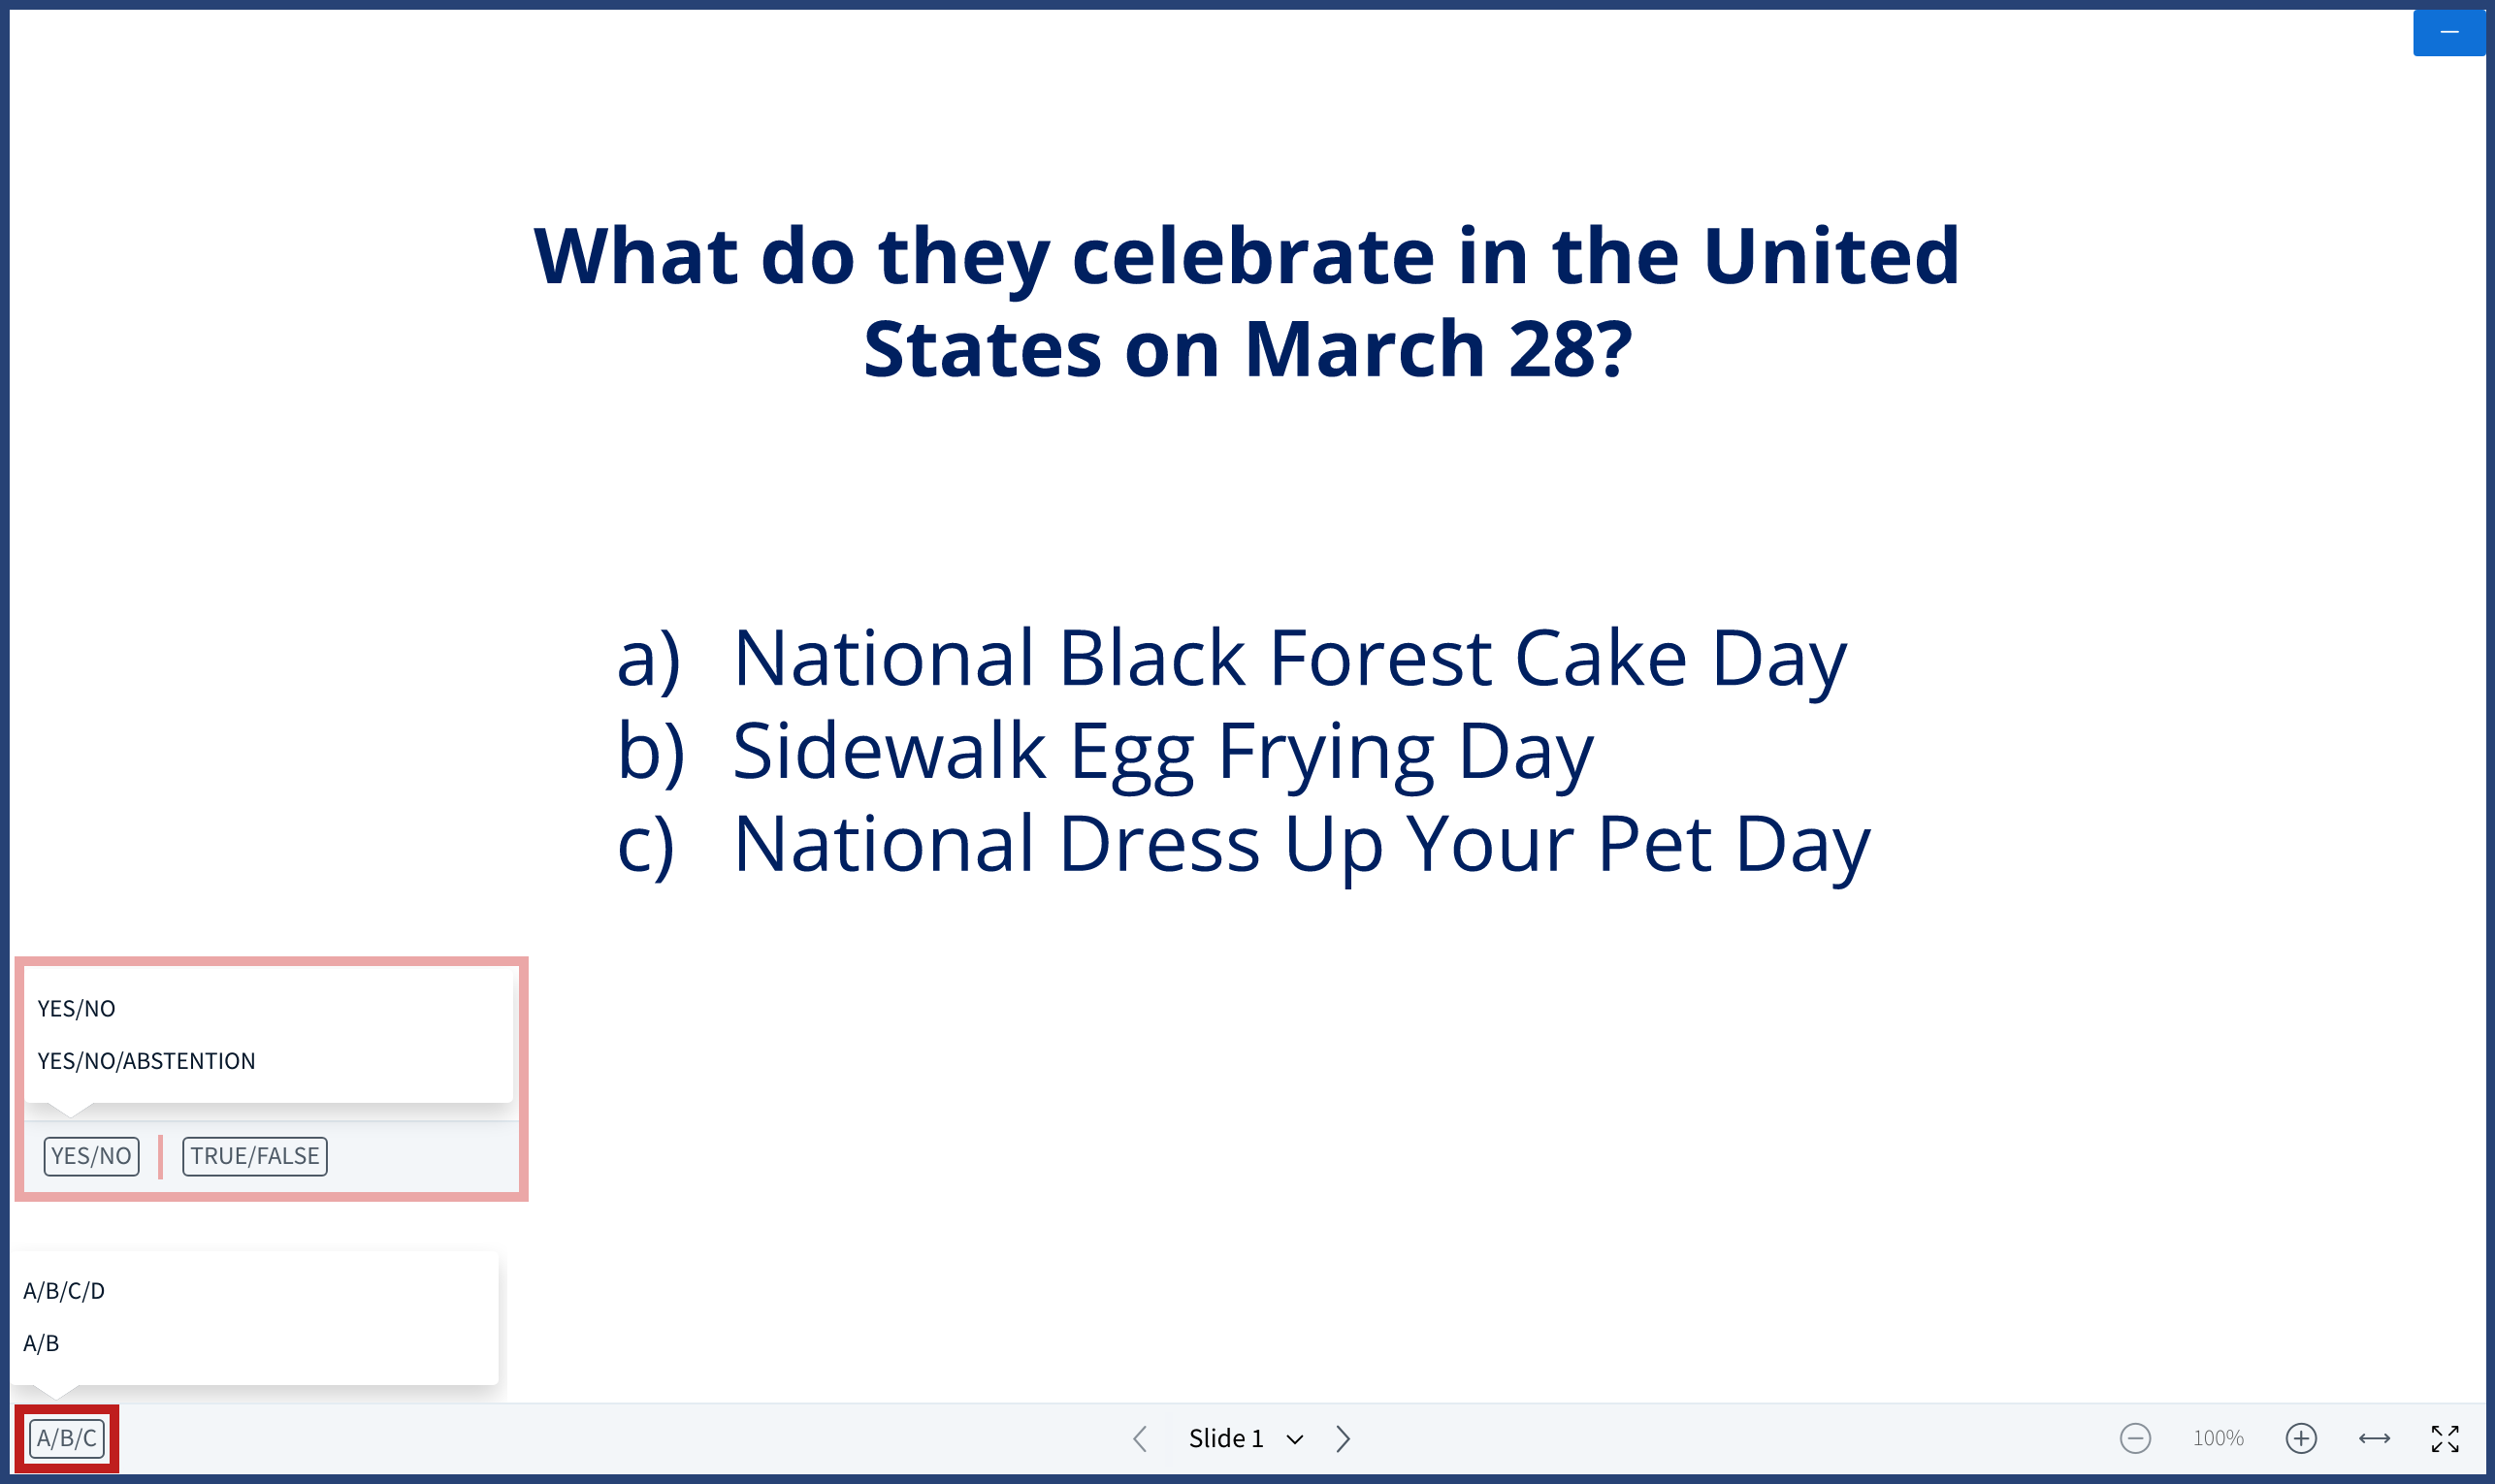 Smart slide with "Quick Poll" button highlighted und display of other format types, presented question: What do they celebrate in the United States on March 28? a) National Black Forest Cake Day b) Sidewalk Egg Frying Day c) national Dress Up Your Pet Day